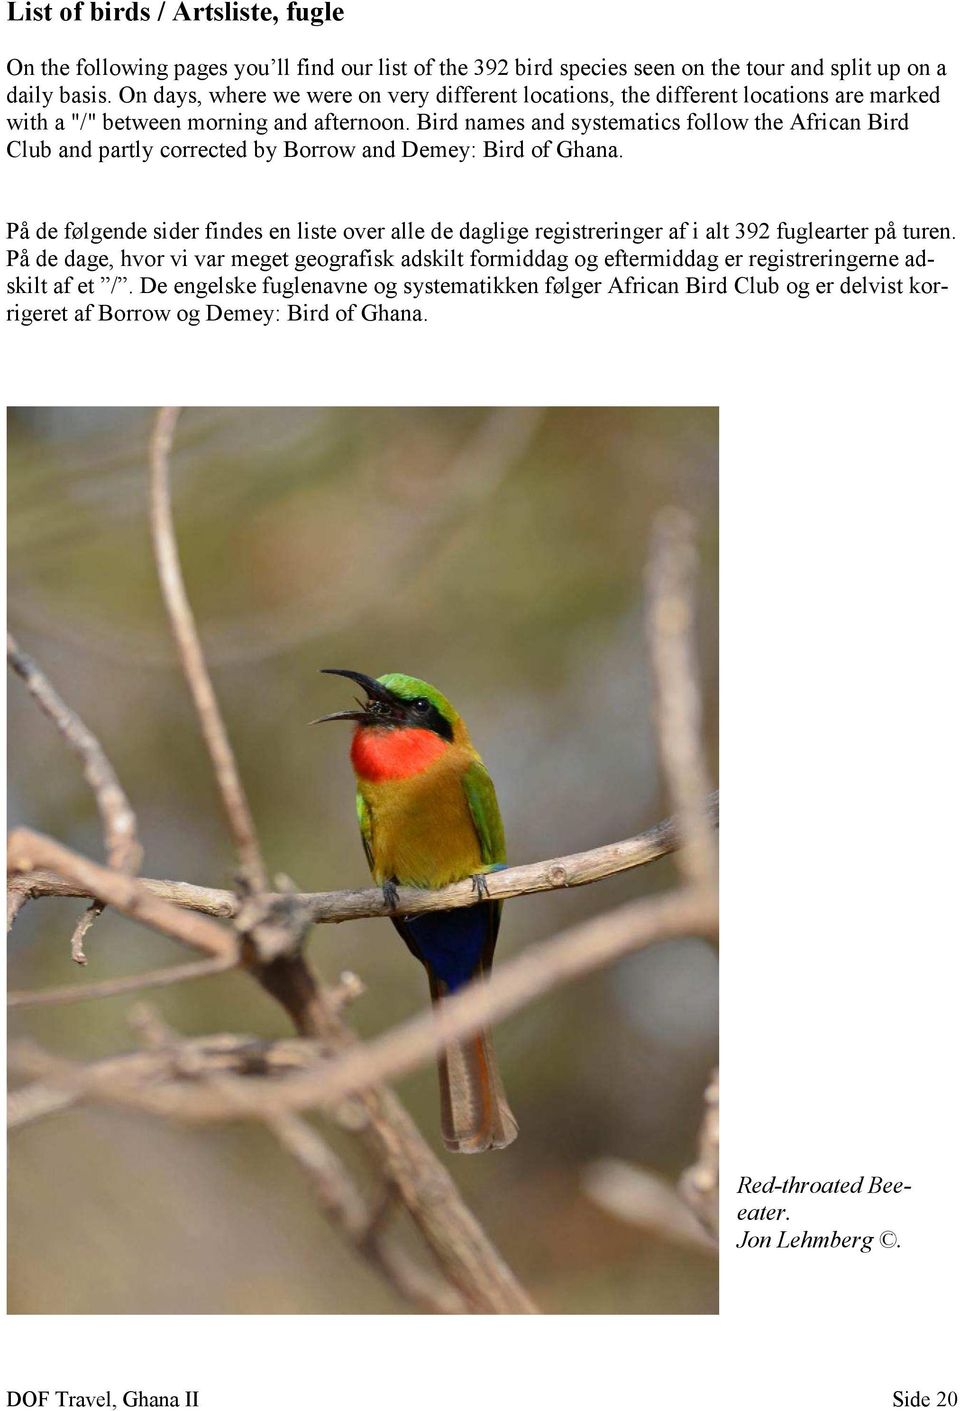 Bird names and systematics follow the African Bird Club and partly corrected by Borrow and Demey: Bird of Ghana.